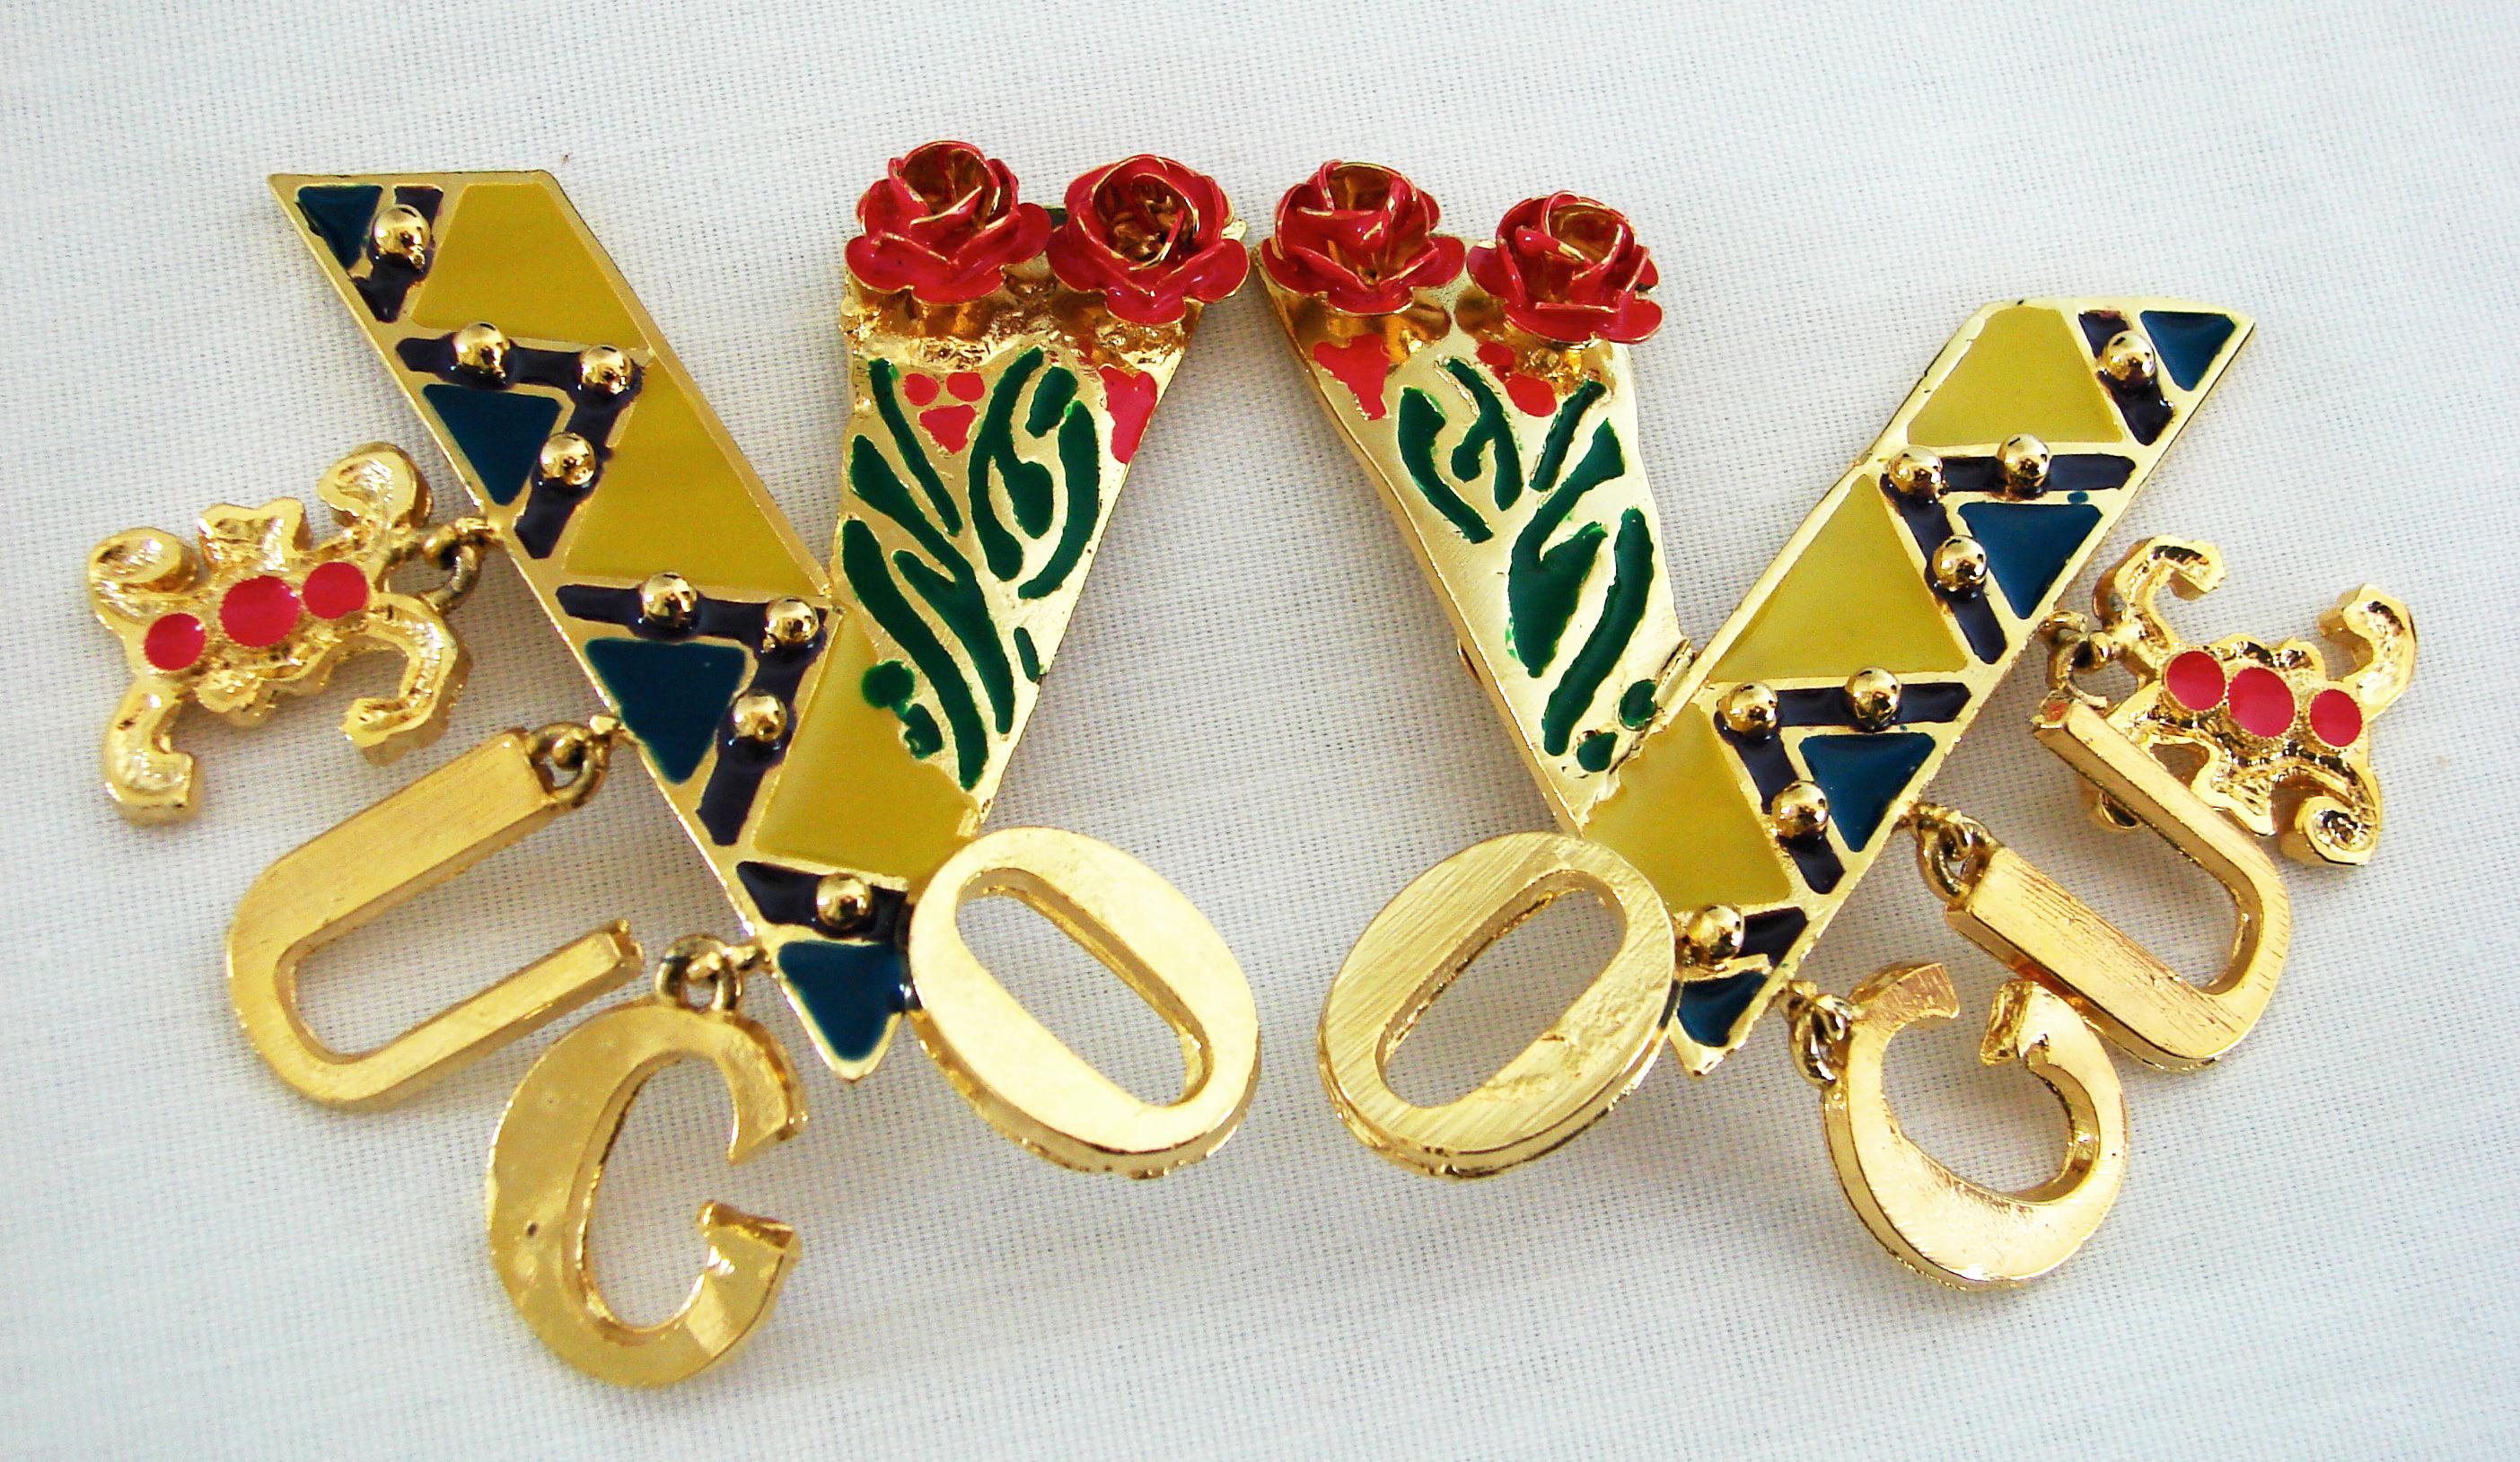 Original Gianni Versace Large Vogue Cover Earrings Enamel with Roses 1990s + Box 3